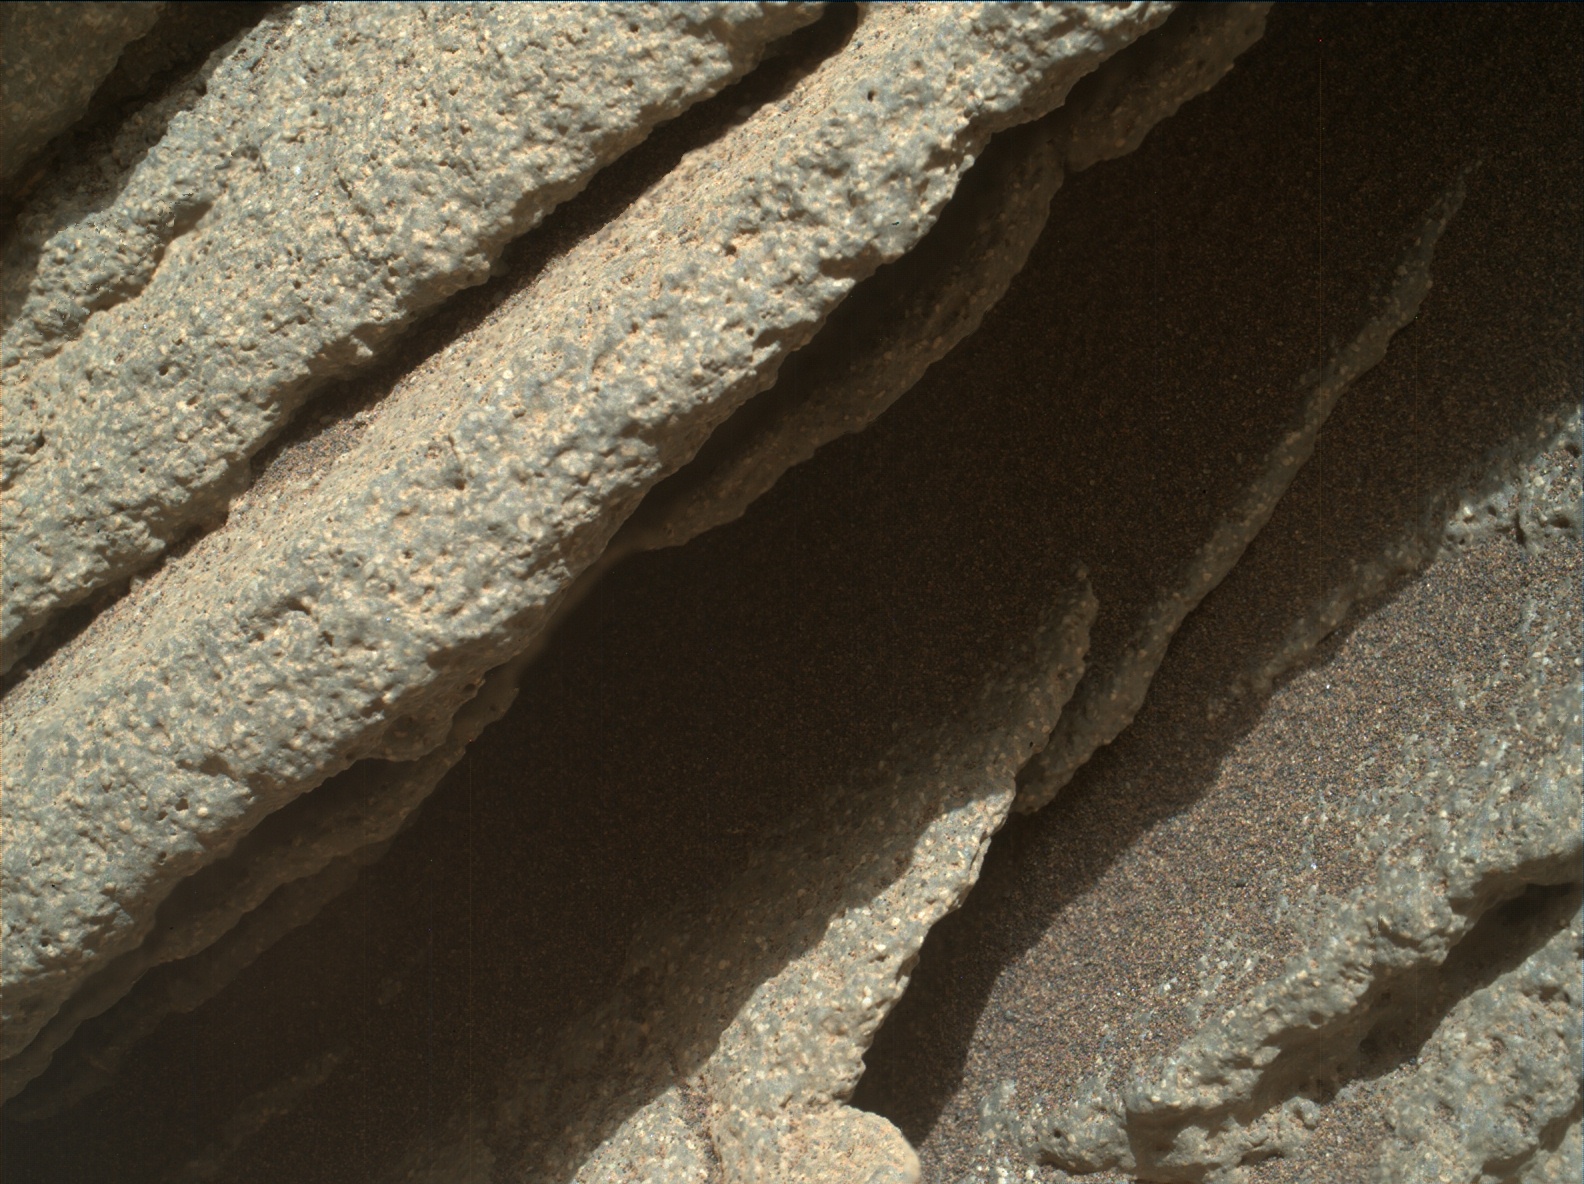 Nasa's Mars rover Curiosity acquired this image using its Mars Hand Lens Imager (MAHLI) on Sol 860